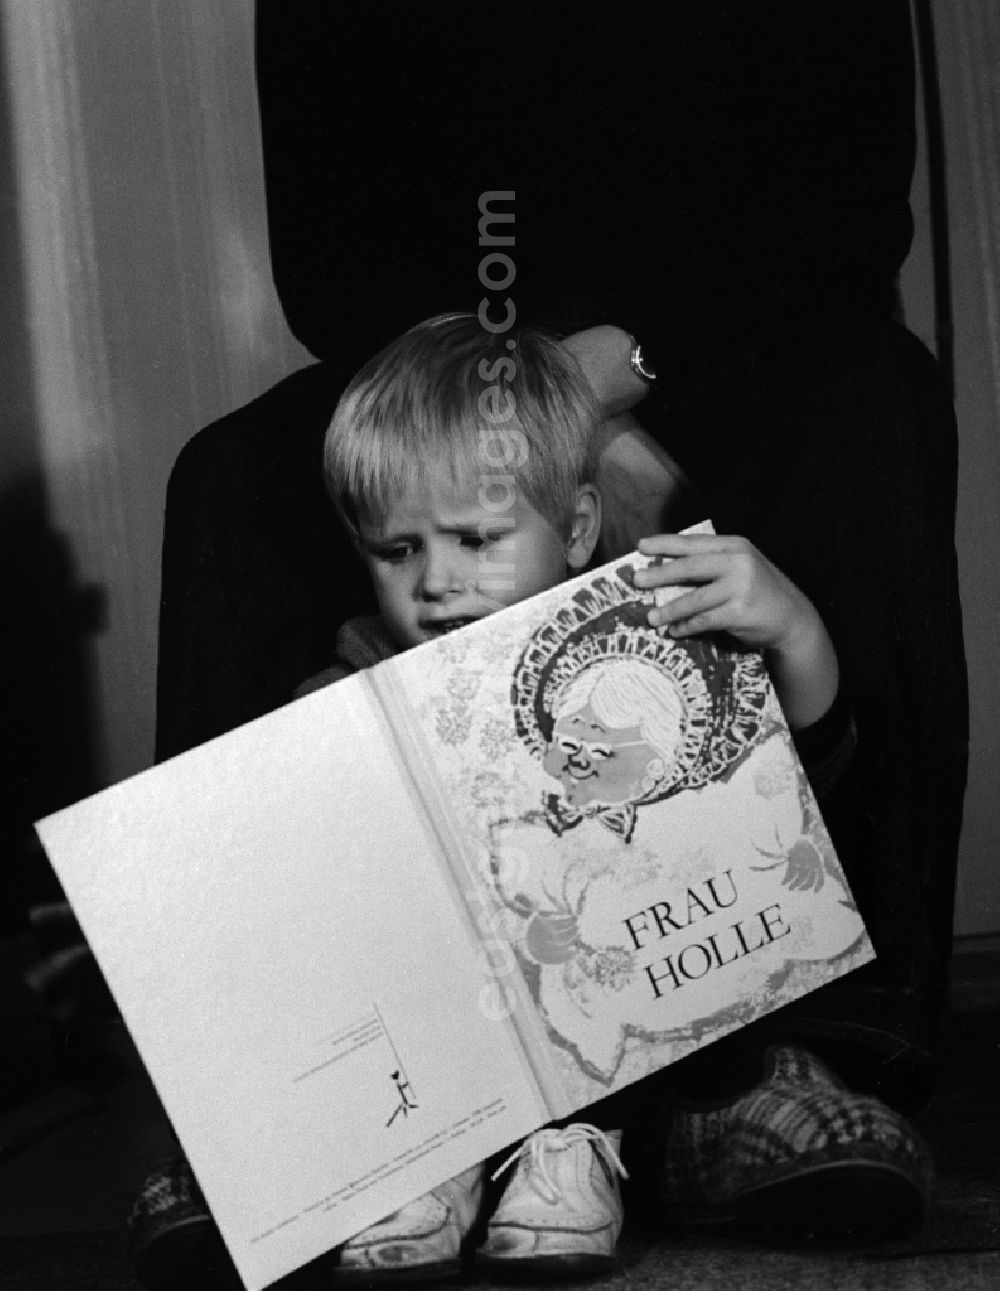 GDR image archive: Berlin - A small child is sitting between the feet of an adult and looks the children's book Mother Holle on, in Berlin, the former capital of the GDR, German Democratic Republic